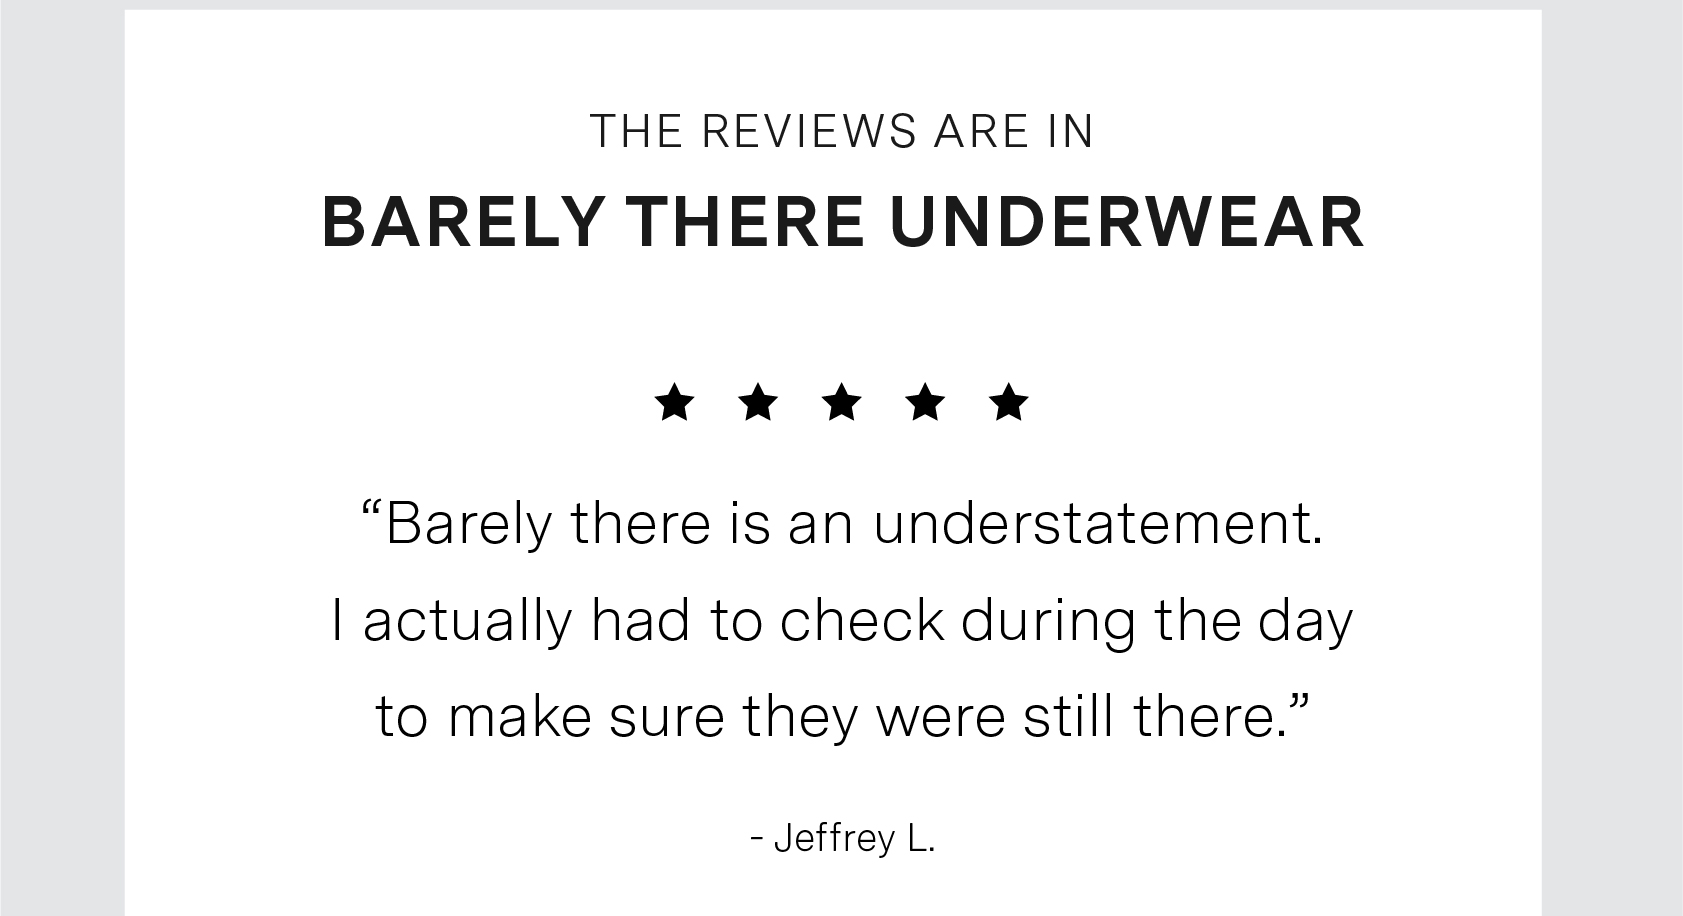 THE REVIEWS ARE IN: BARELY THERE UNDERWEAR.  